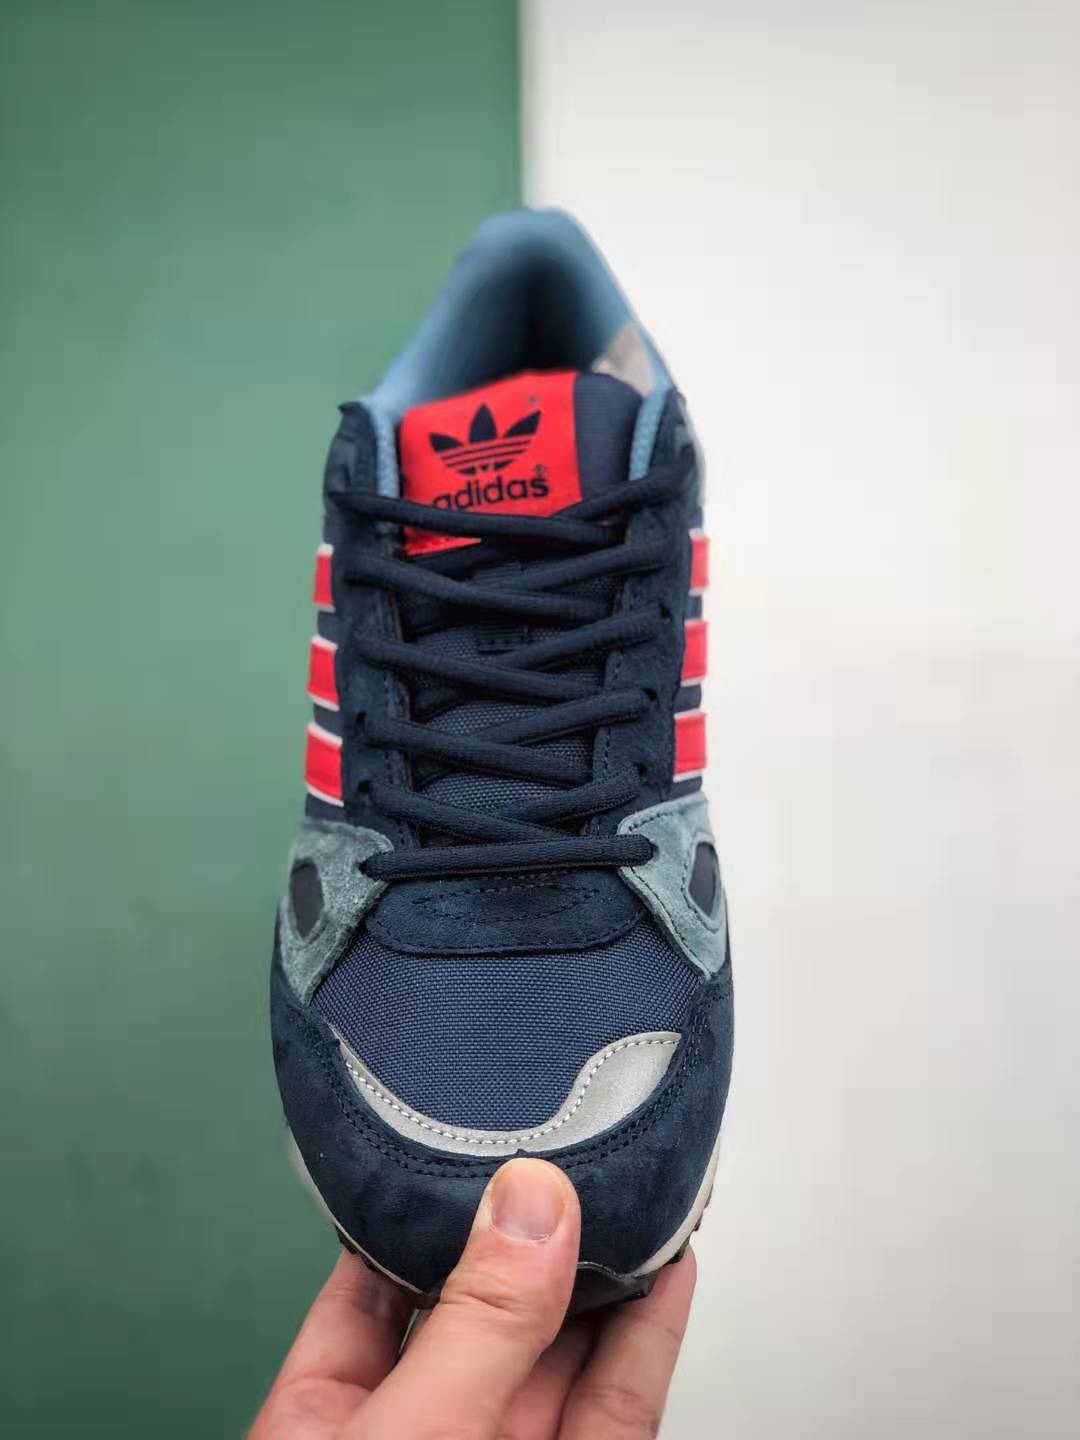 Adidas ZX 750 Navy Black Red M18260 | Stylish and Comfortable Sneakers